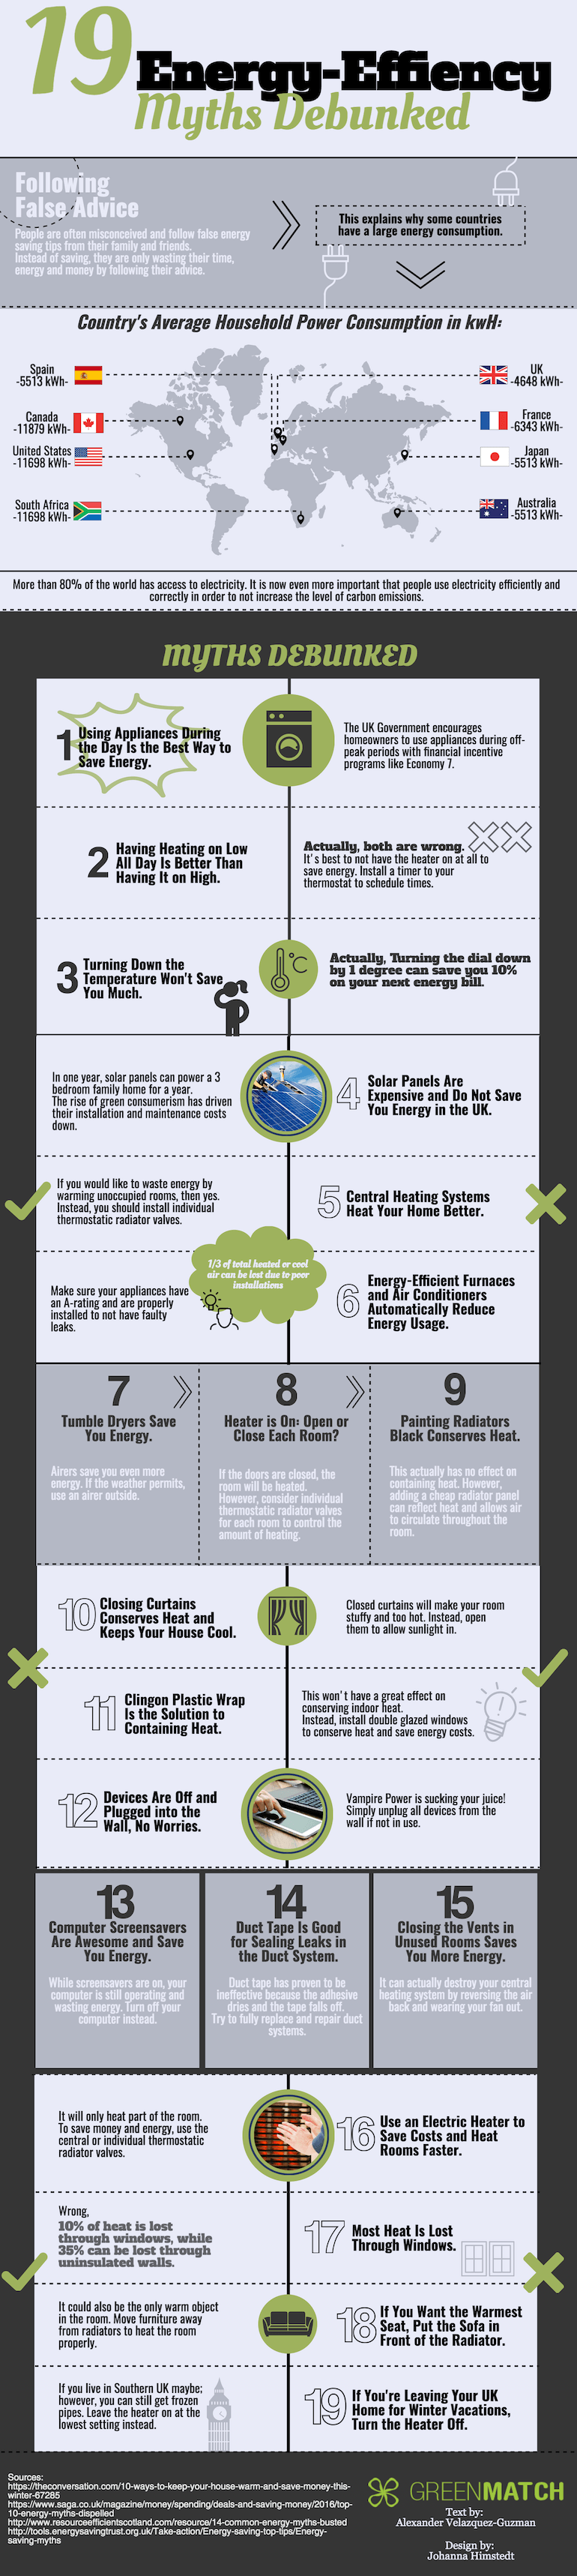 energy efficiency myths infographic